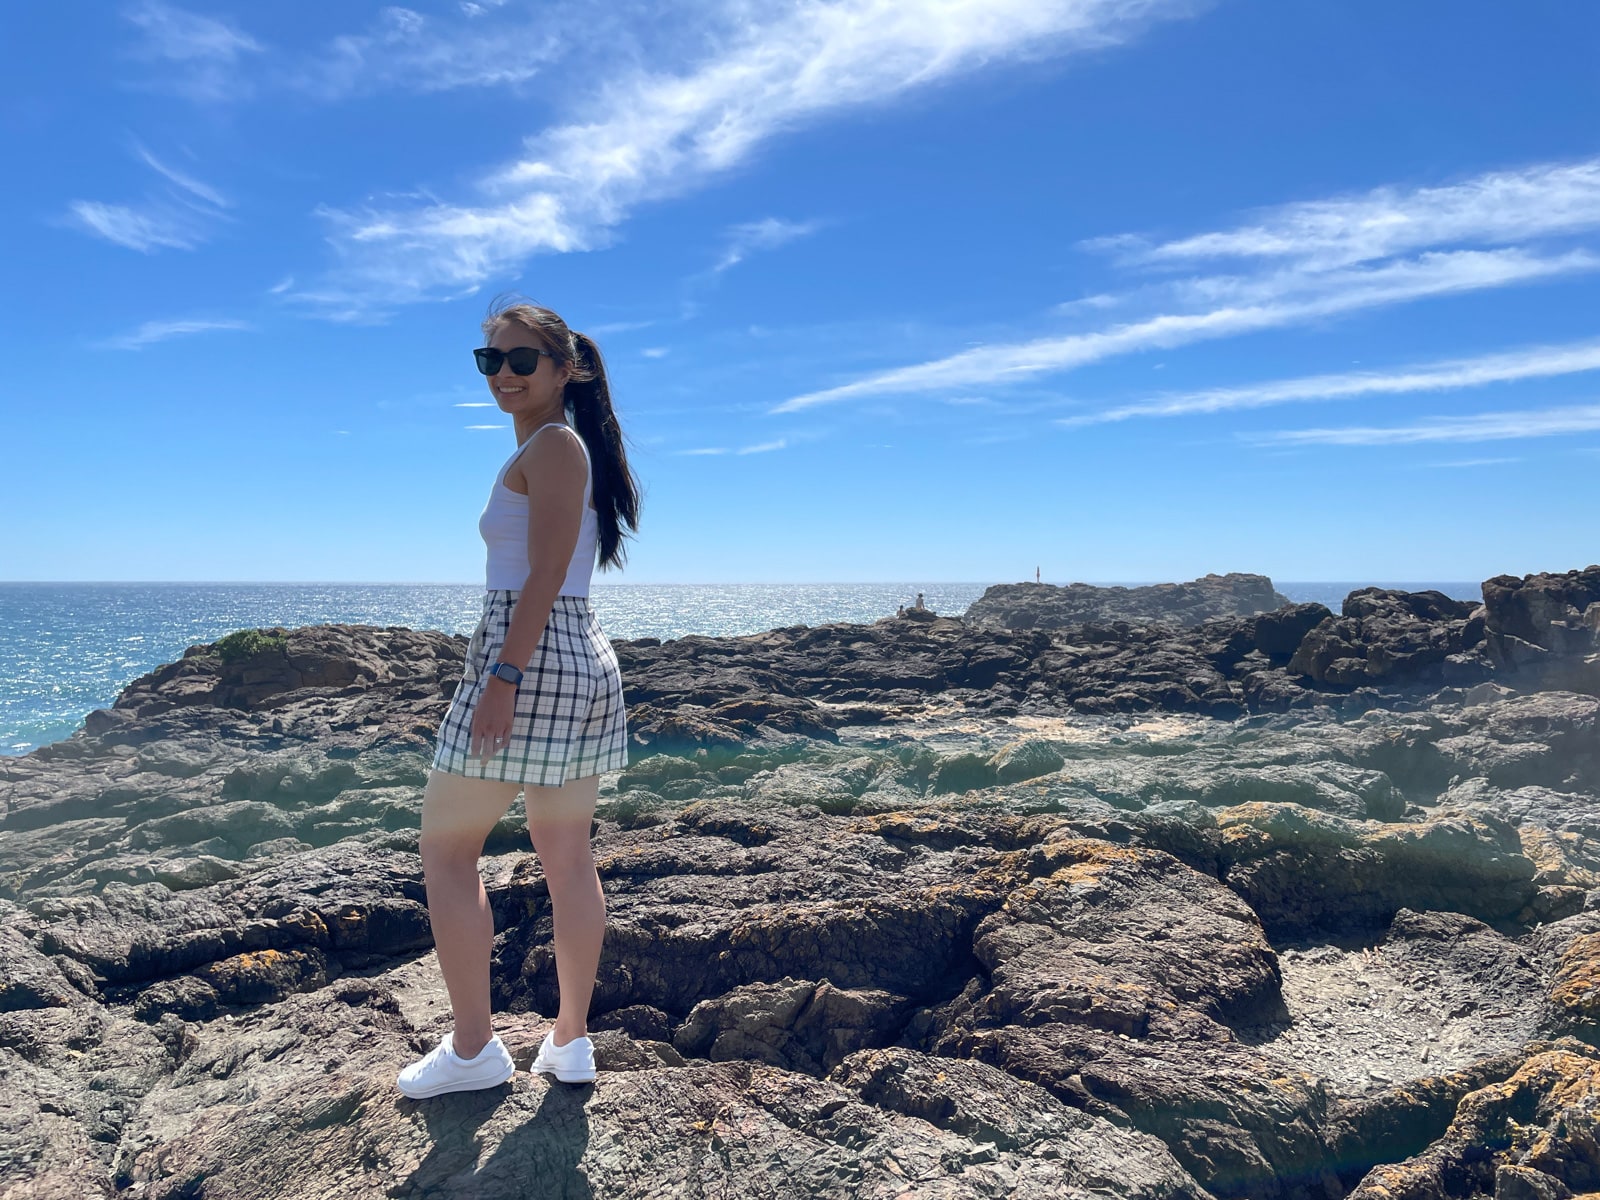 A woman with long dark hair in a ponytail, wearing sunglasses. She is dressed in a white top and checkered shorts and white shoes, and is standing on a big rocky surface with the ocean in the background